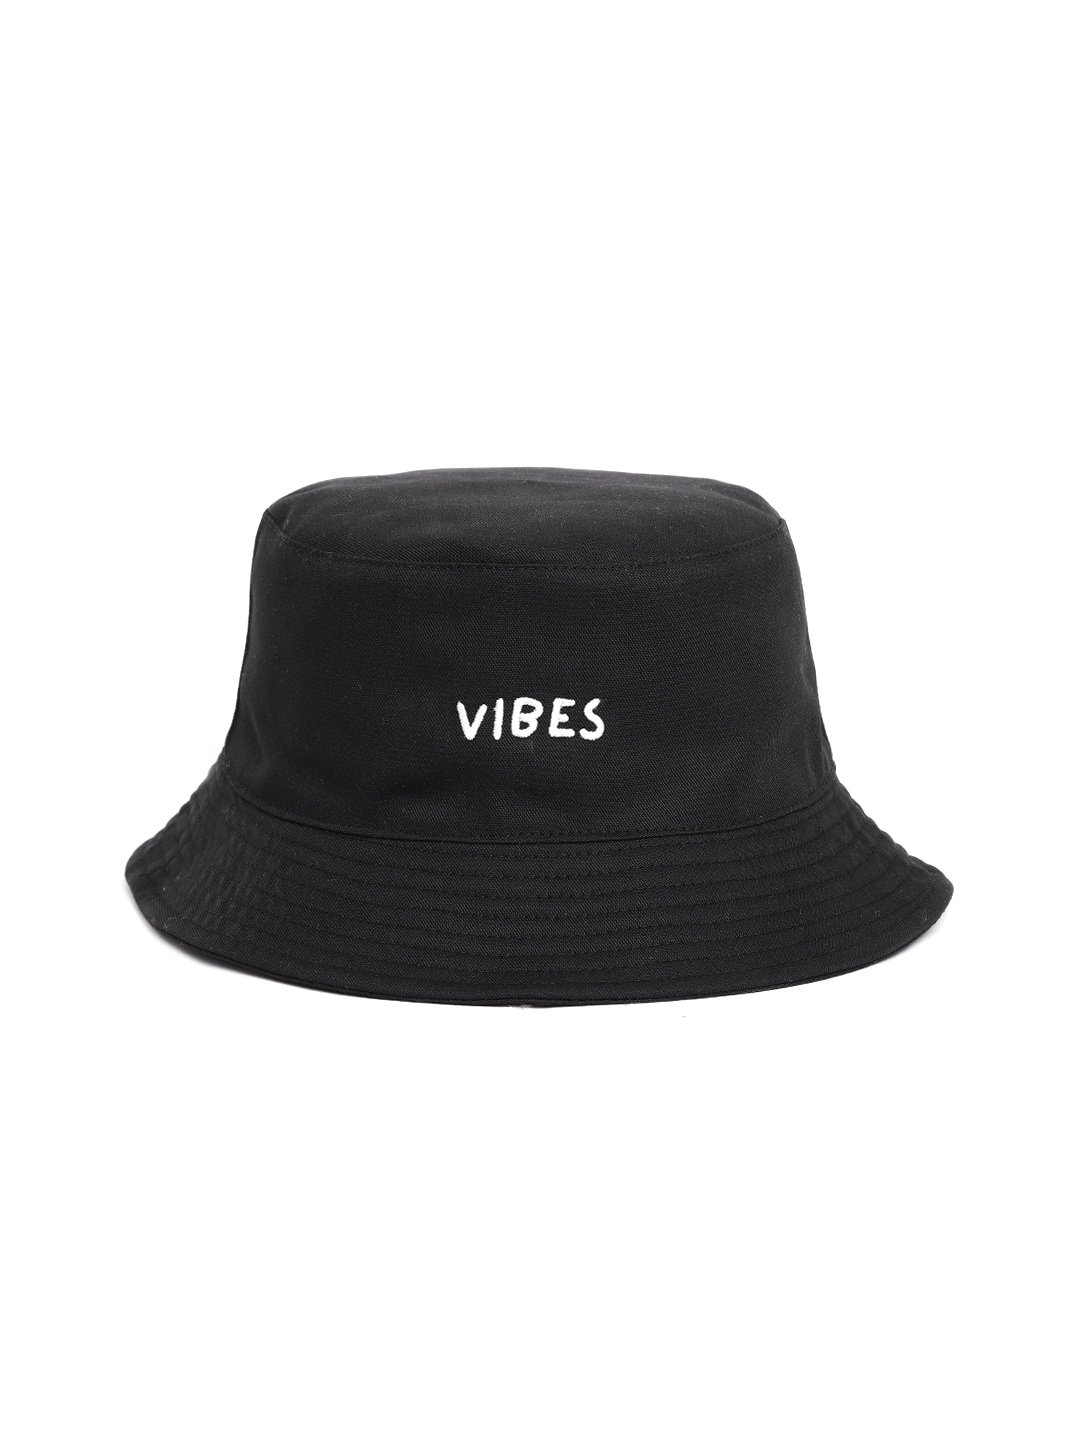 Blueberry Unisex Black Embroidered Reversible Bucket Hat Price in India